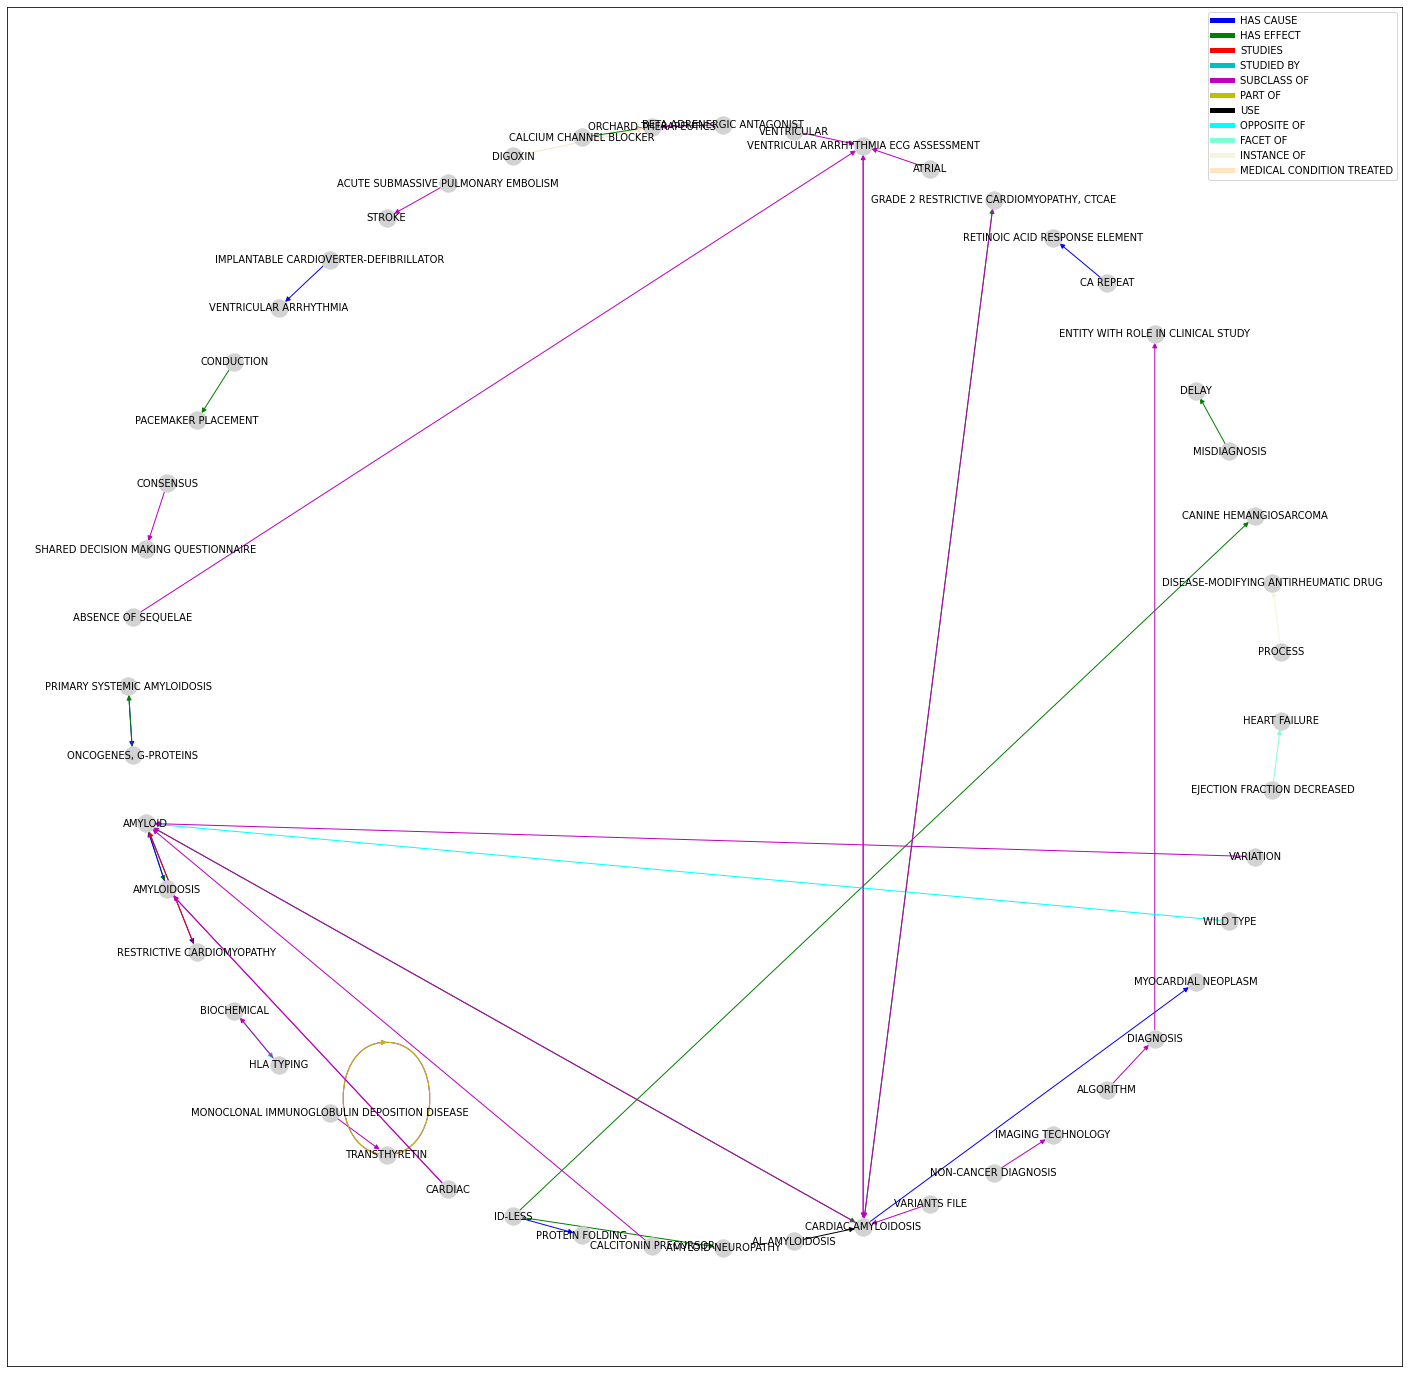 Final knowledge graph visualisation. The relations names are omitted.